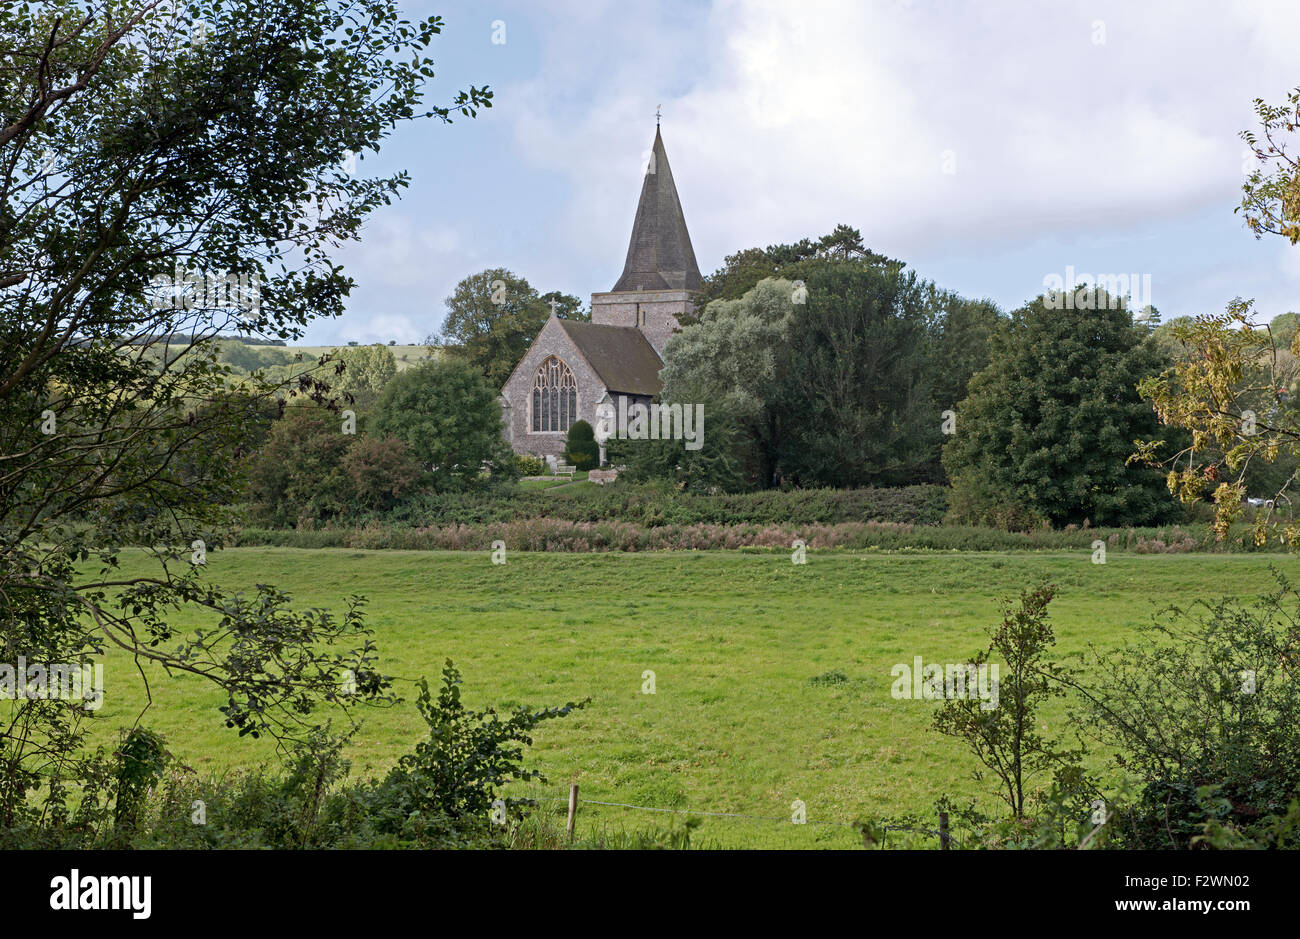 St Andrew's Parish Church in the picturesque village of Alfriston in the South Downs National Park, East Sussex. Uk Stock Photo